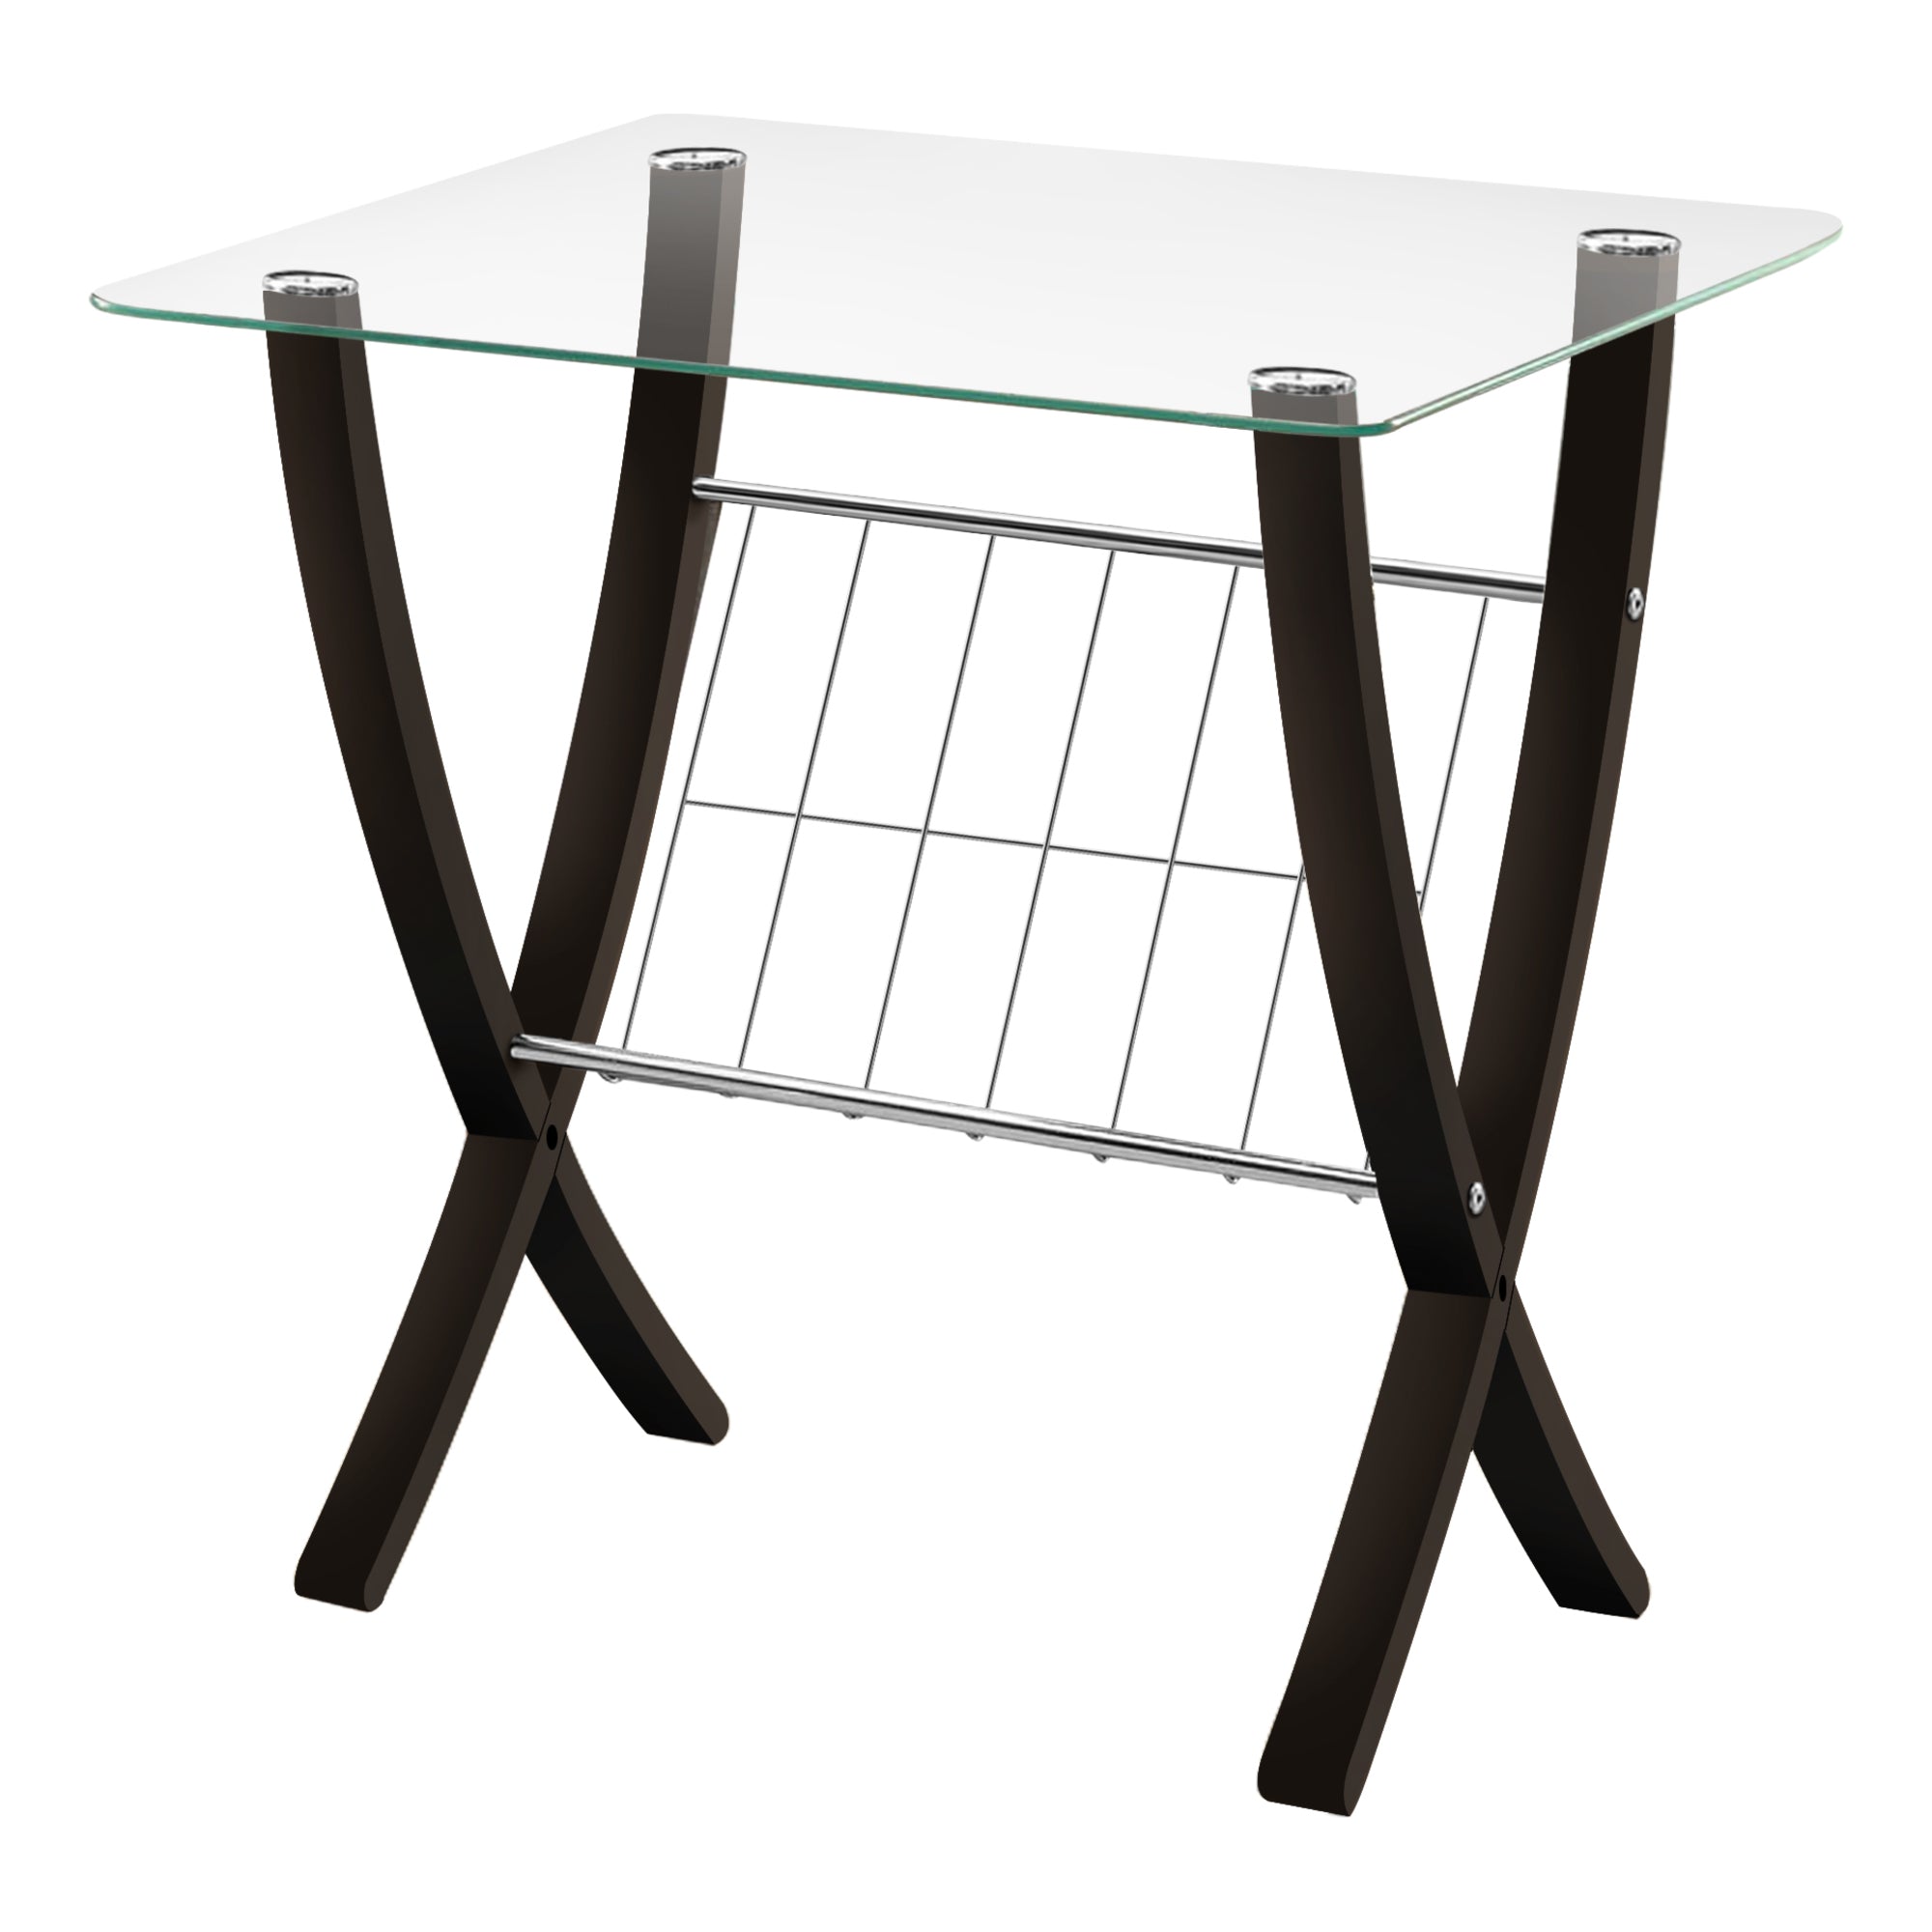 MN-813021    Accent Table, Side, End, Nightstand, Lamp, Living Room, Bedroom, Metal Legs, Tempered Glass, Dark Brown, Clear, Contemporary, Modern